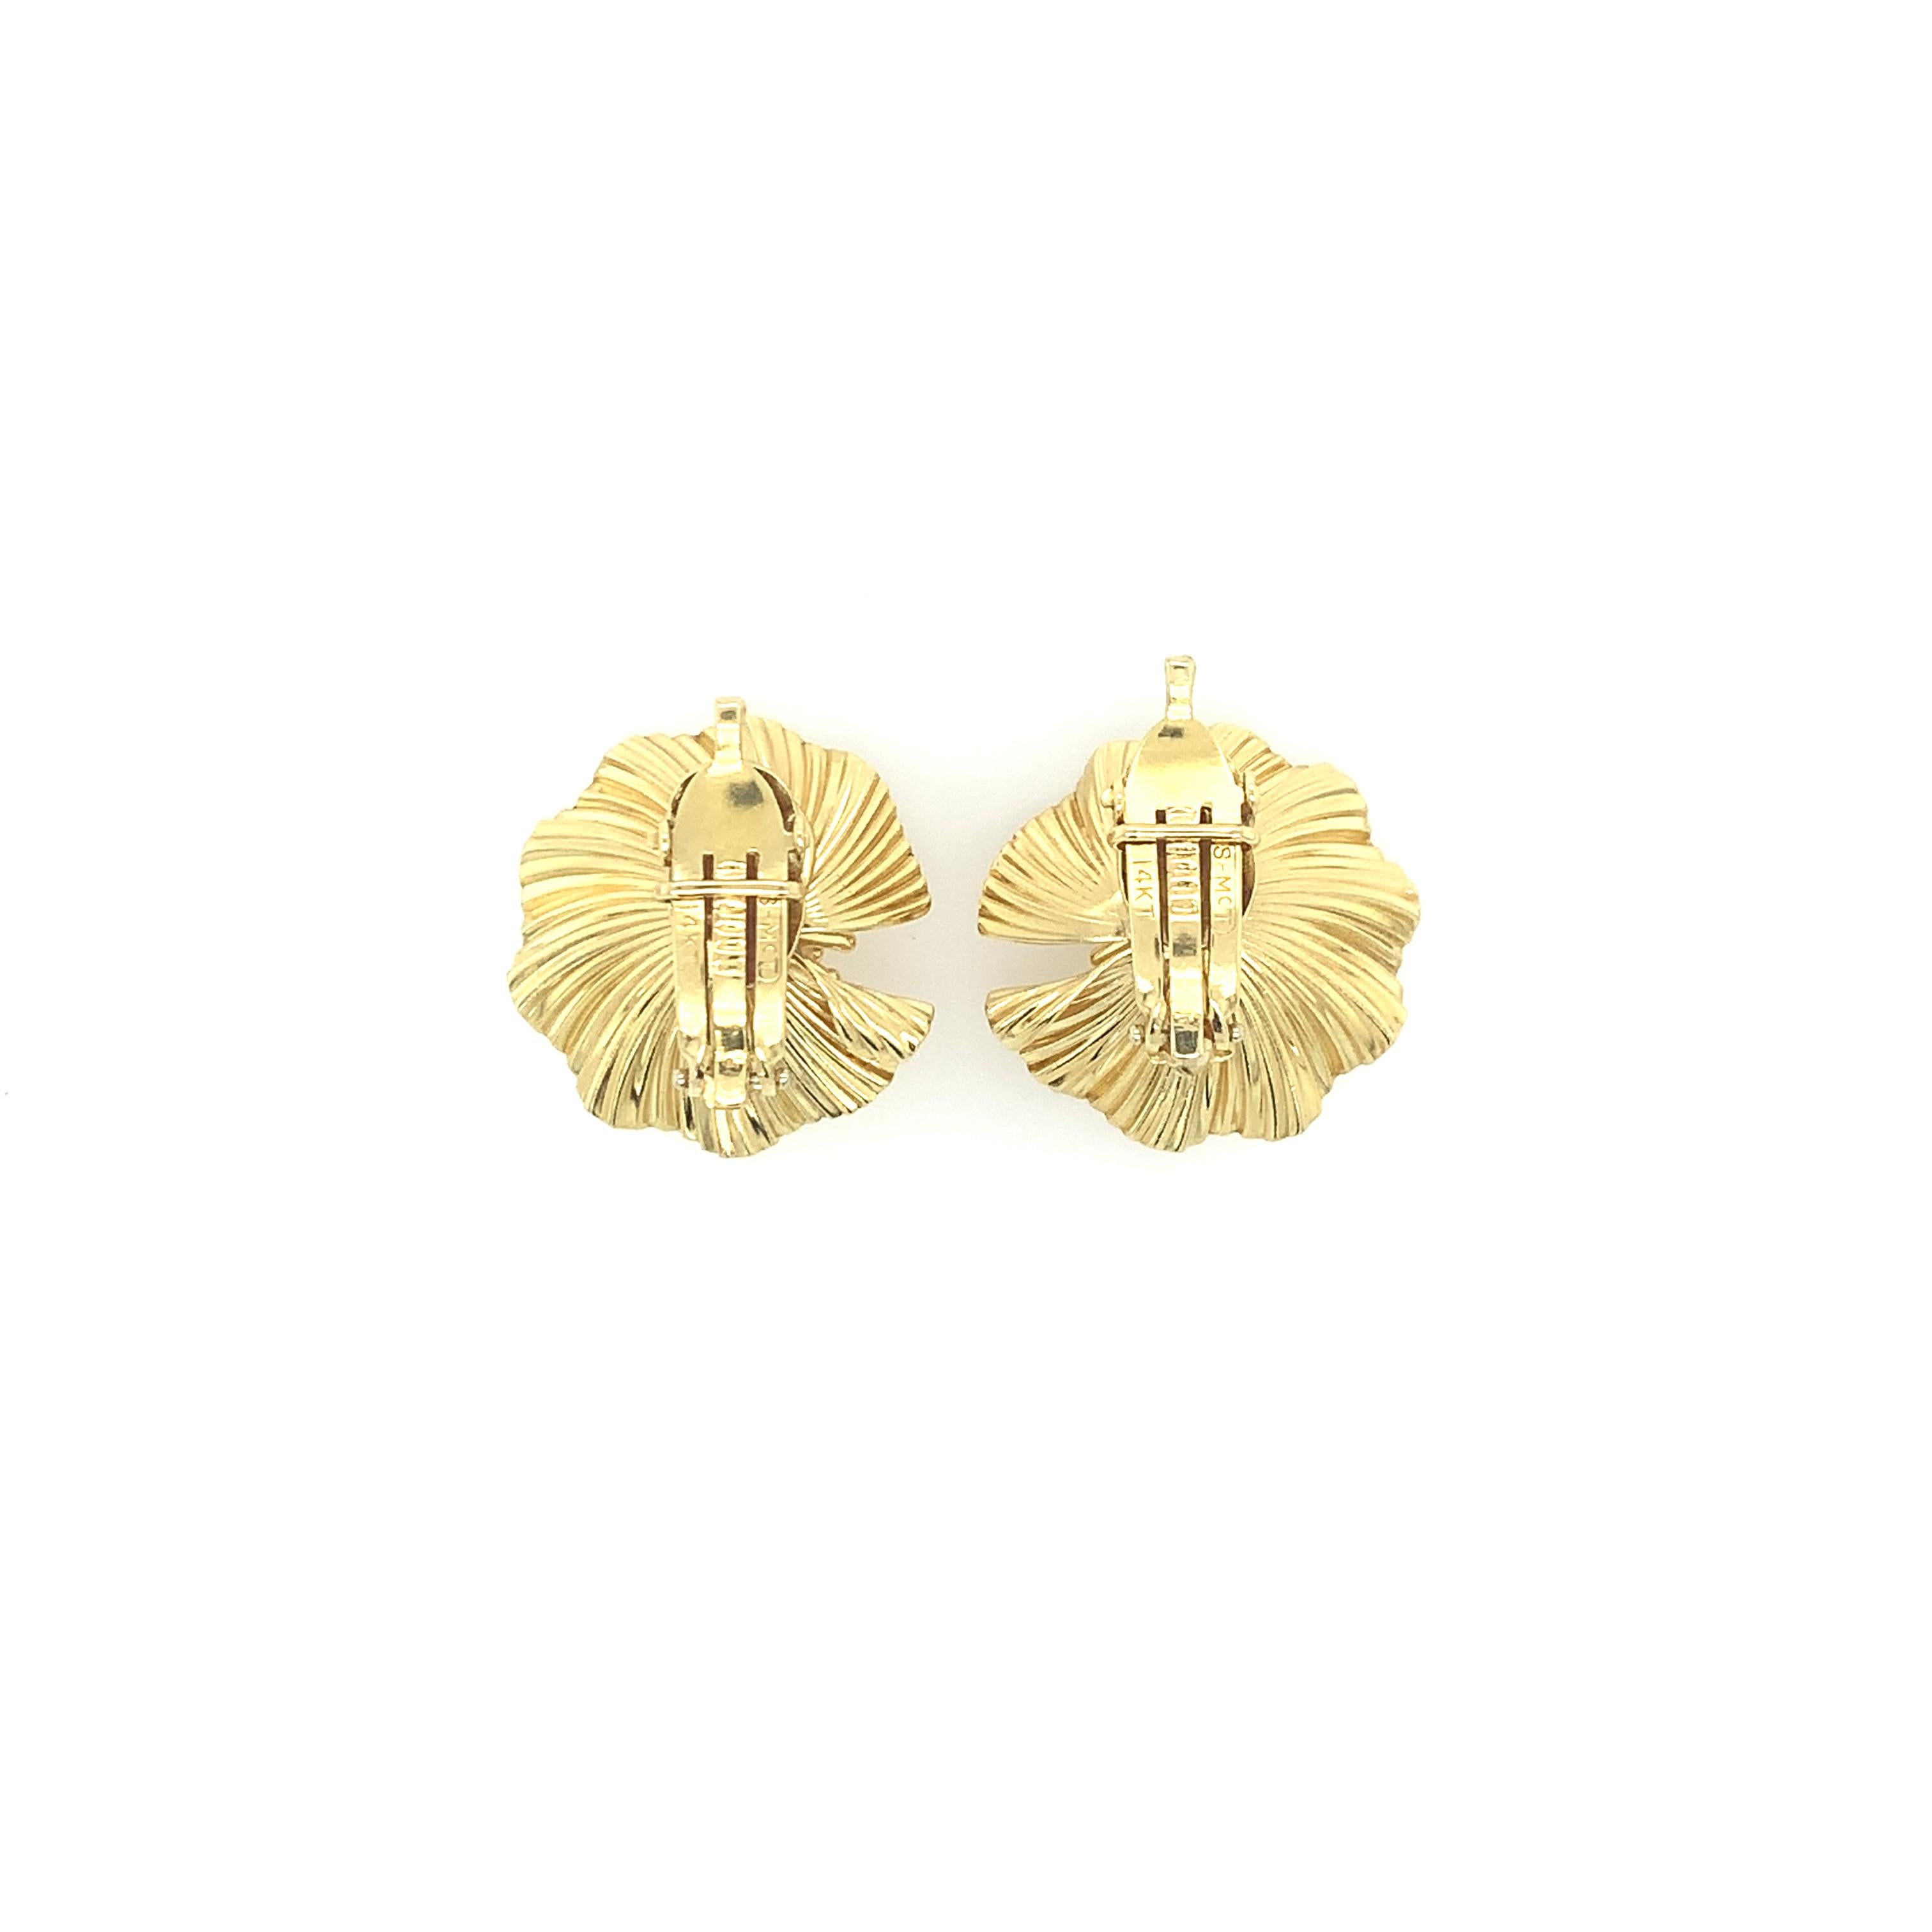 Vintage George Schuler McTeigue Ruffled Flower Gold Clip-on Earrings For Sale 1